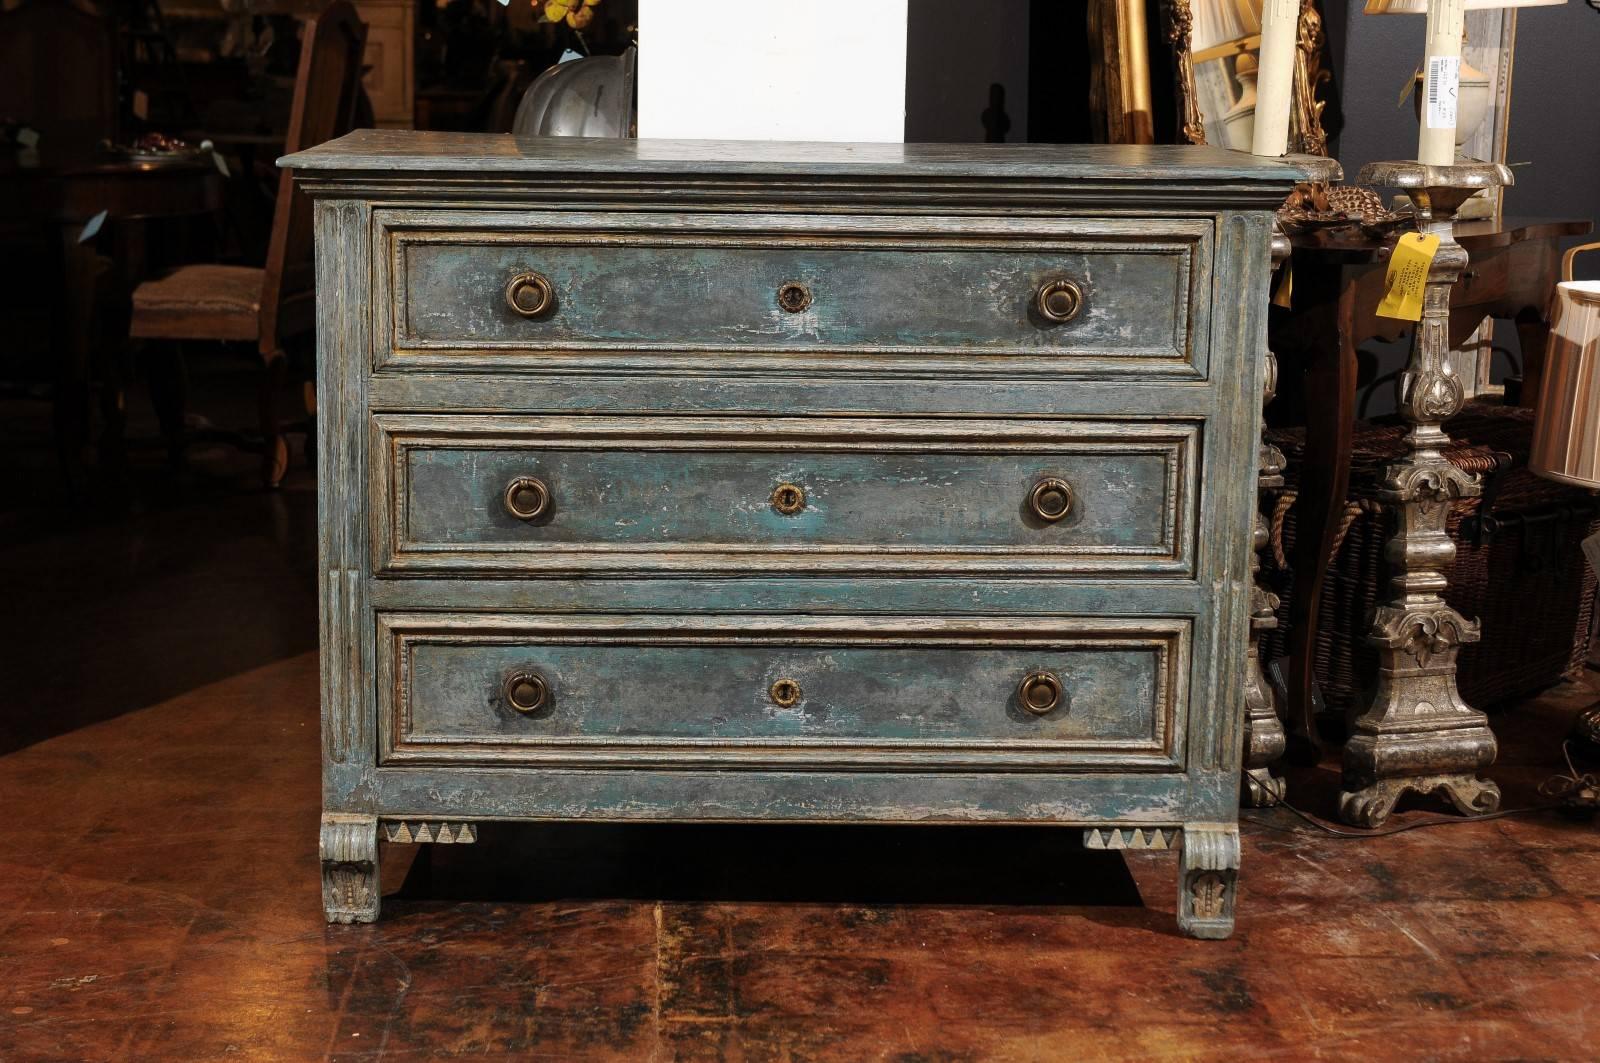 A Swedish neoclassical style blue painted pine three-drawer commode with console feet and fluted sides from the early 19th century. This Swedish painted chest features a marbleized rectangular planked top with rounded edges sitting above three